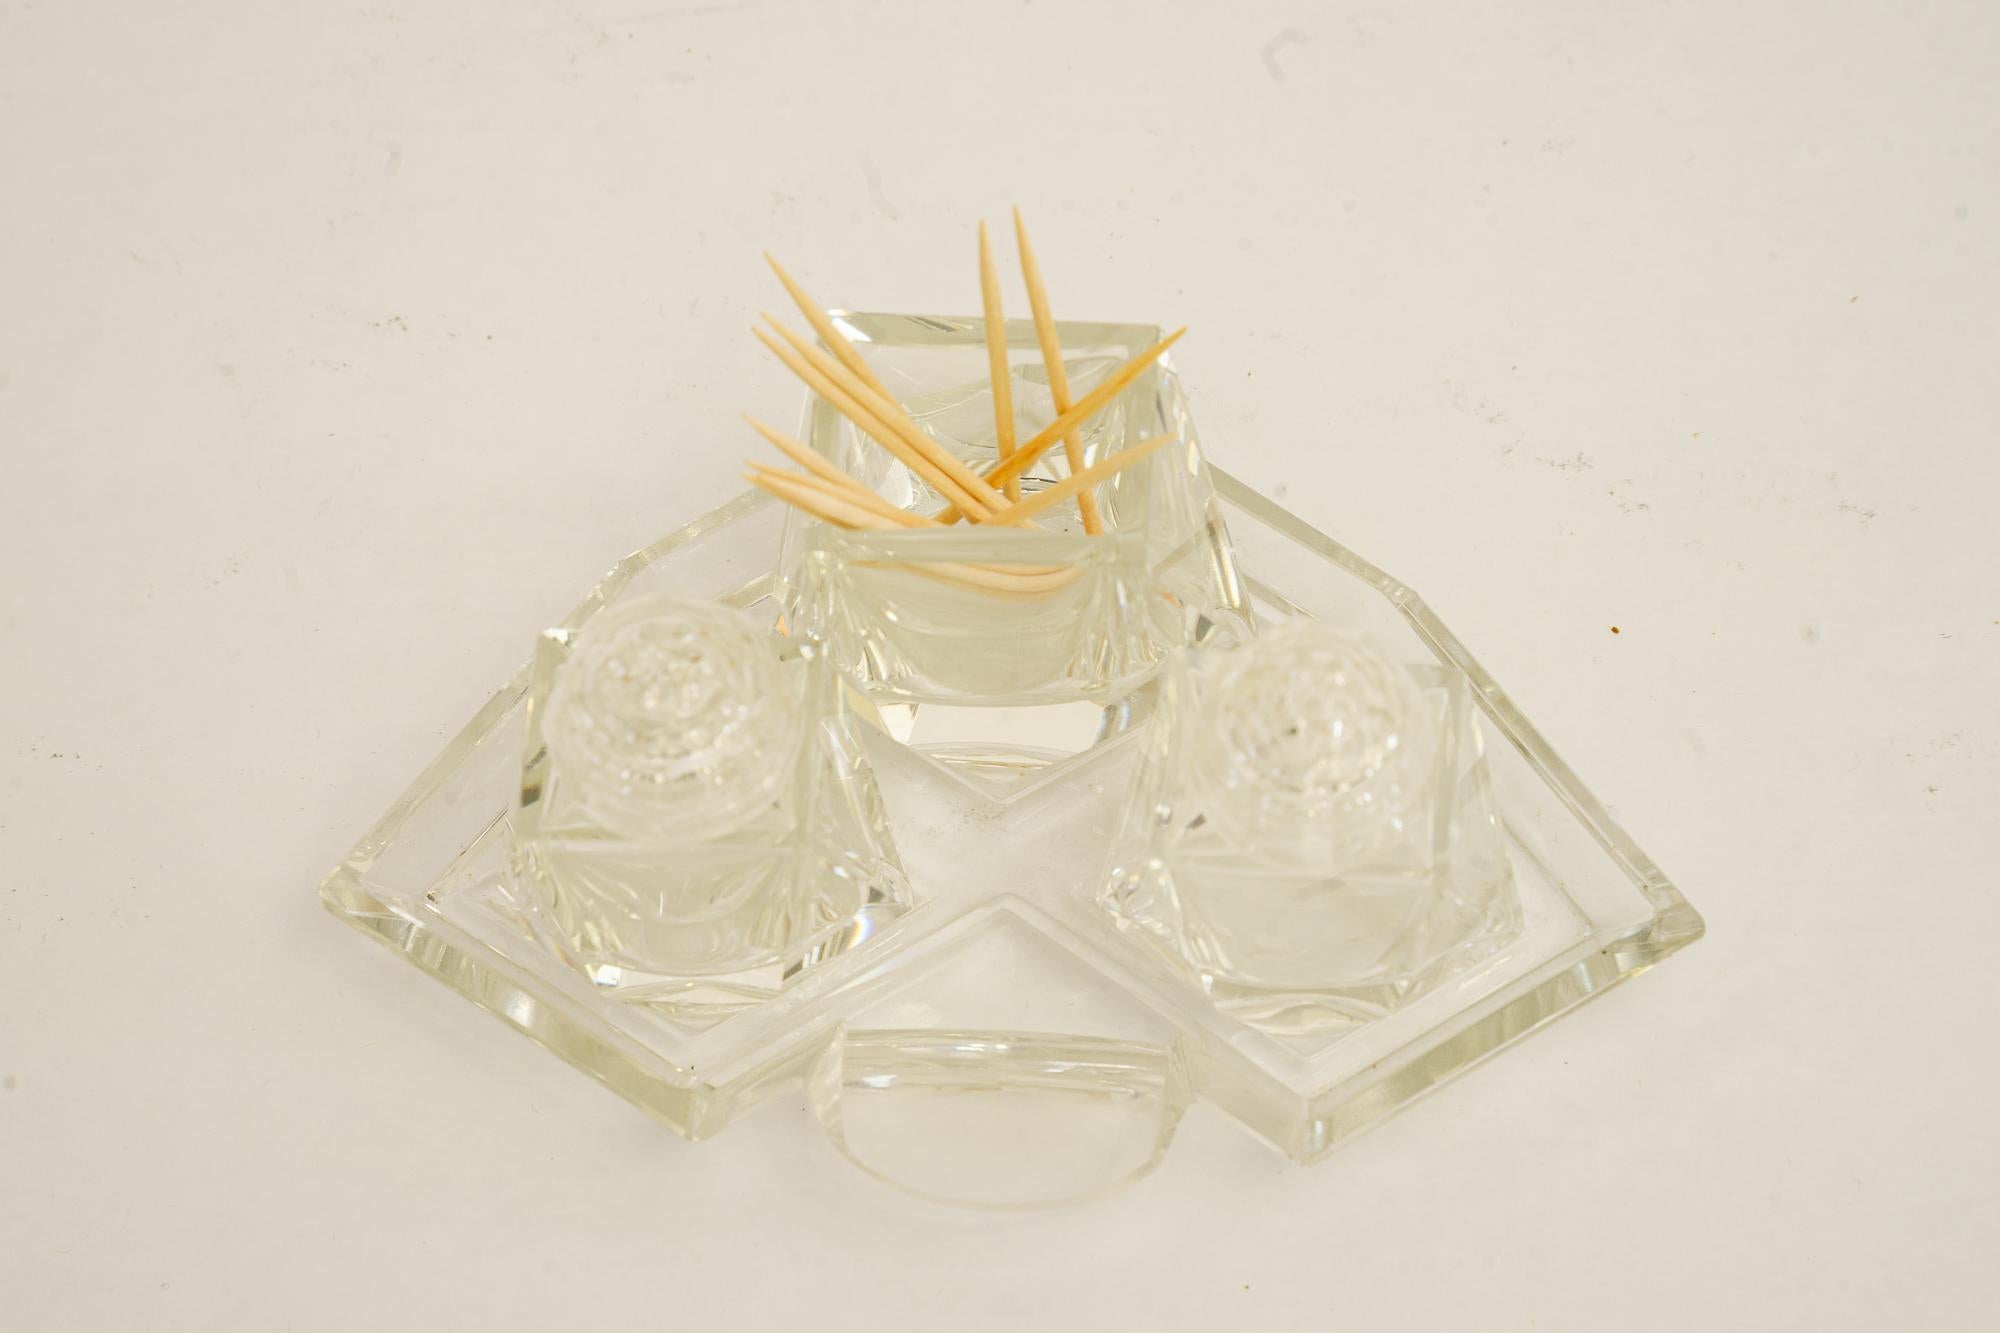 Art Deco glass Salt and pepper with toothpick holders vienna around 1920s
Original condition